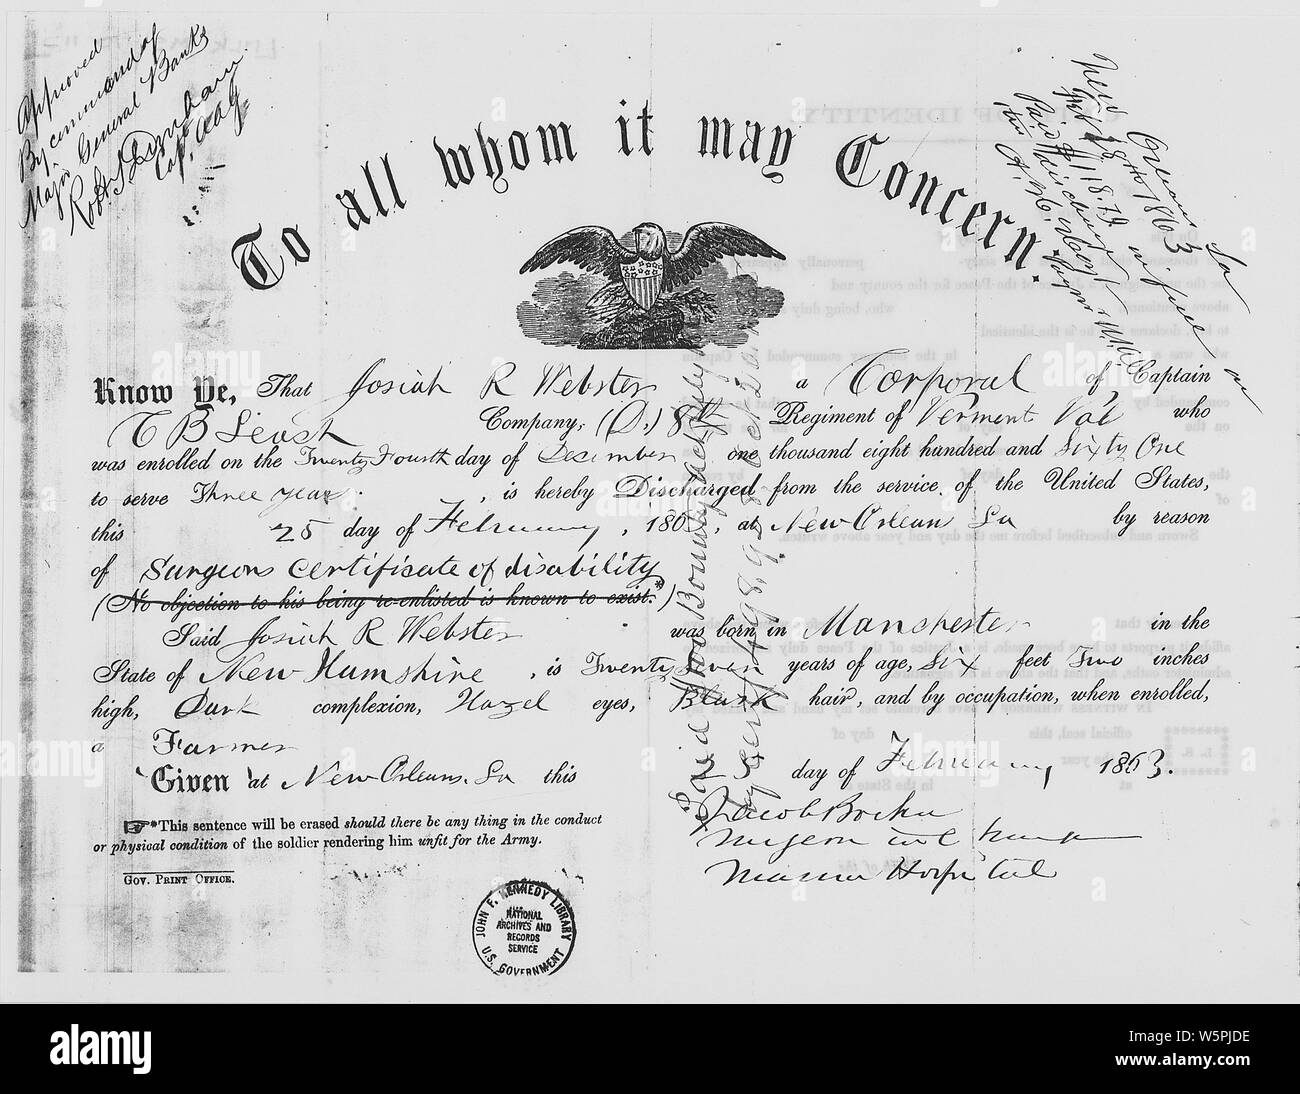 Josiah Webster Civil War Discharge Certificate February, 1863; Scope and content:  Certificate for Josiah Webster discharging him from military service during the Civil War. Stock Photo